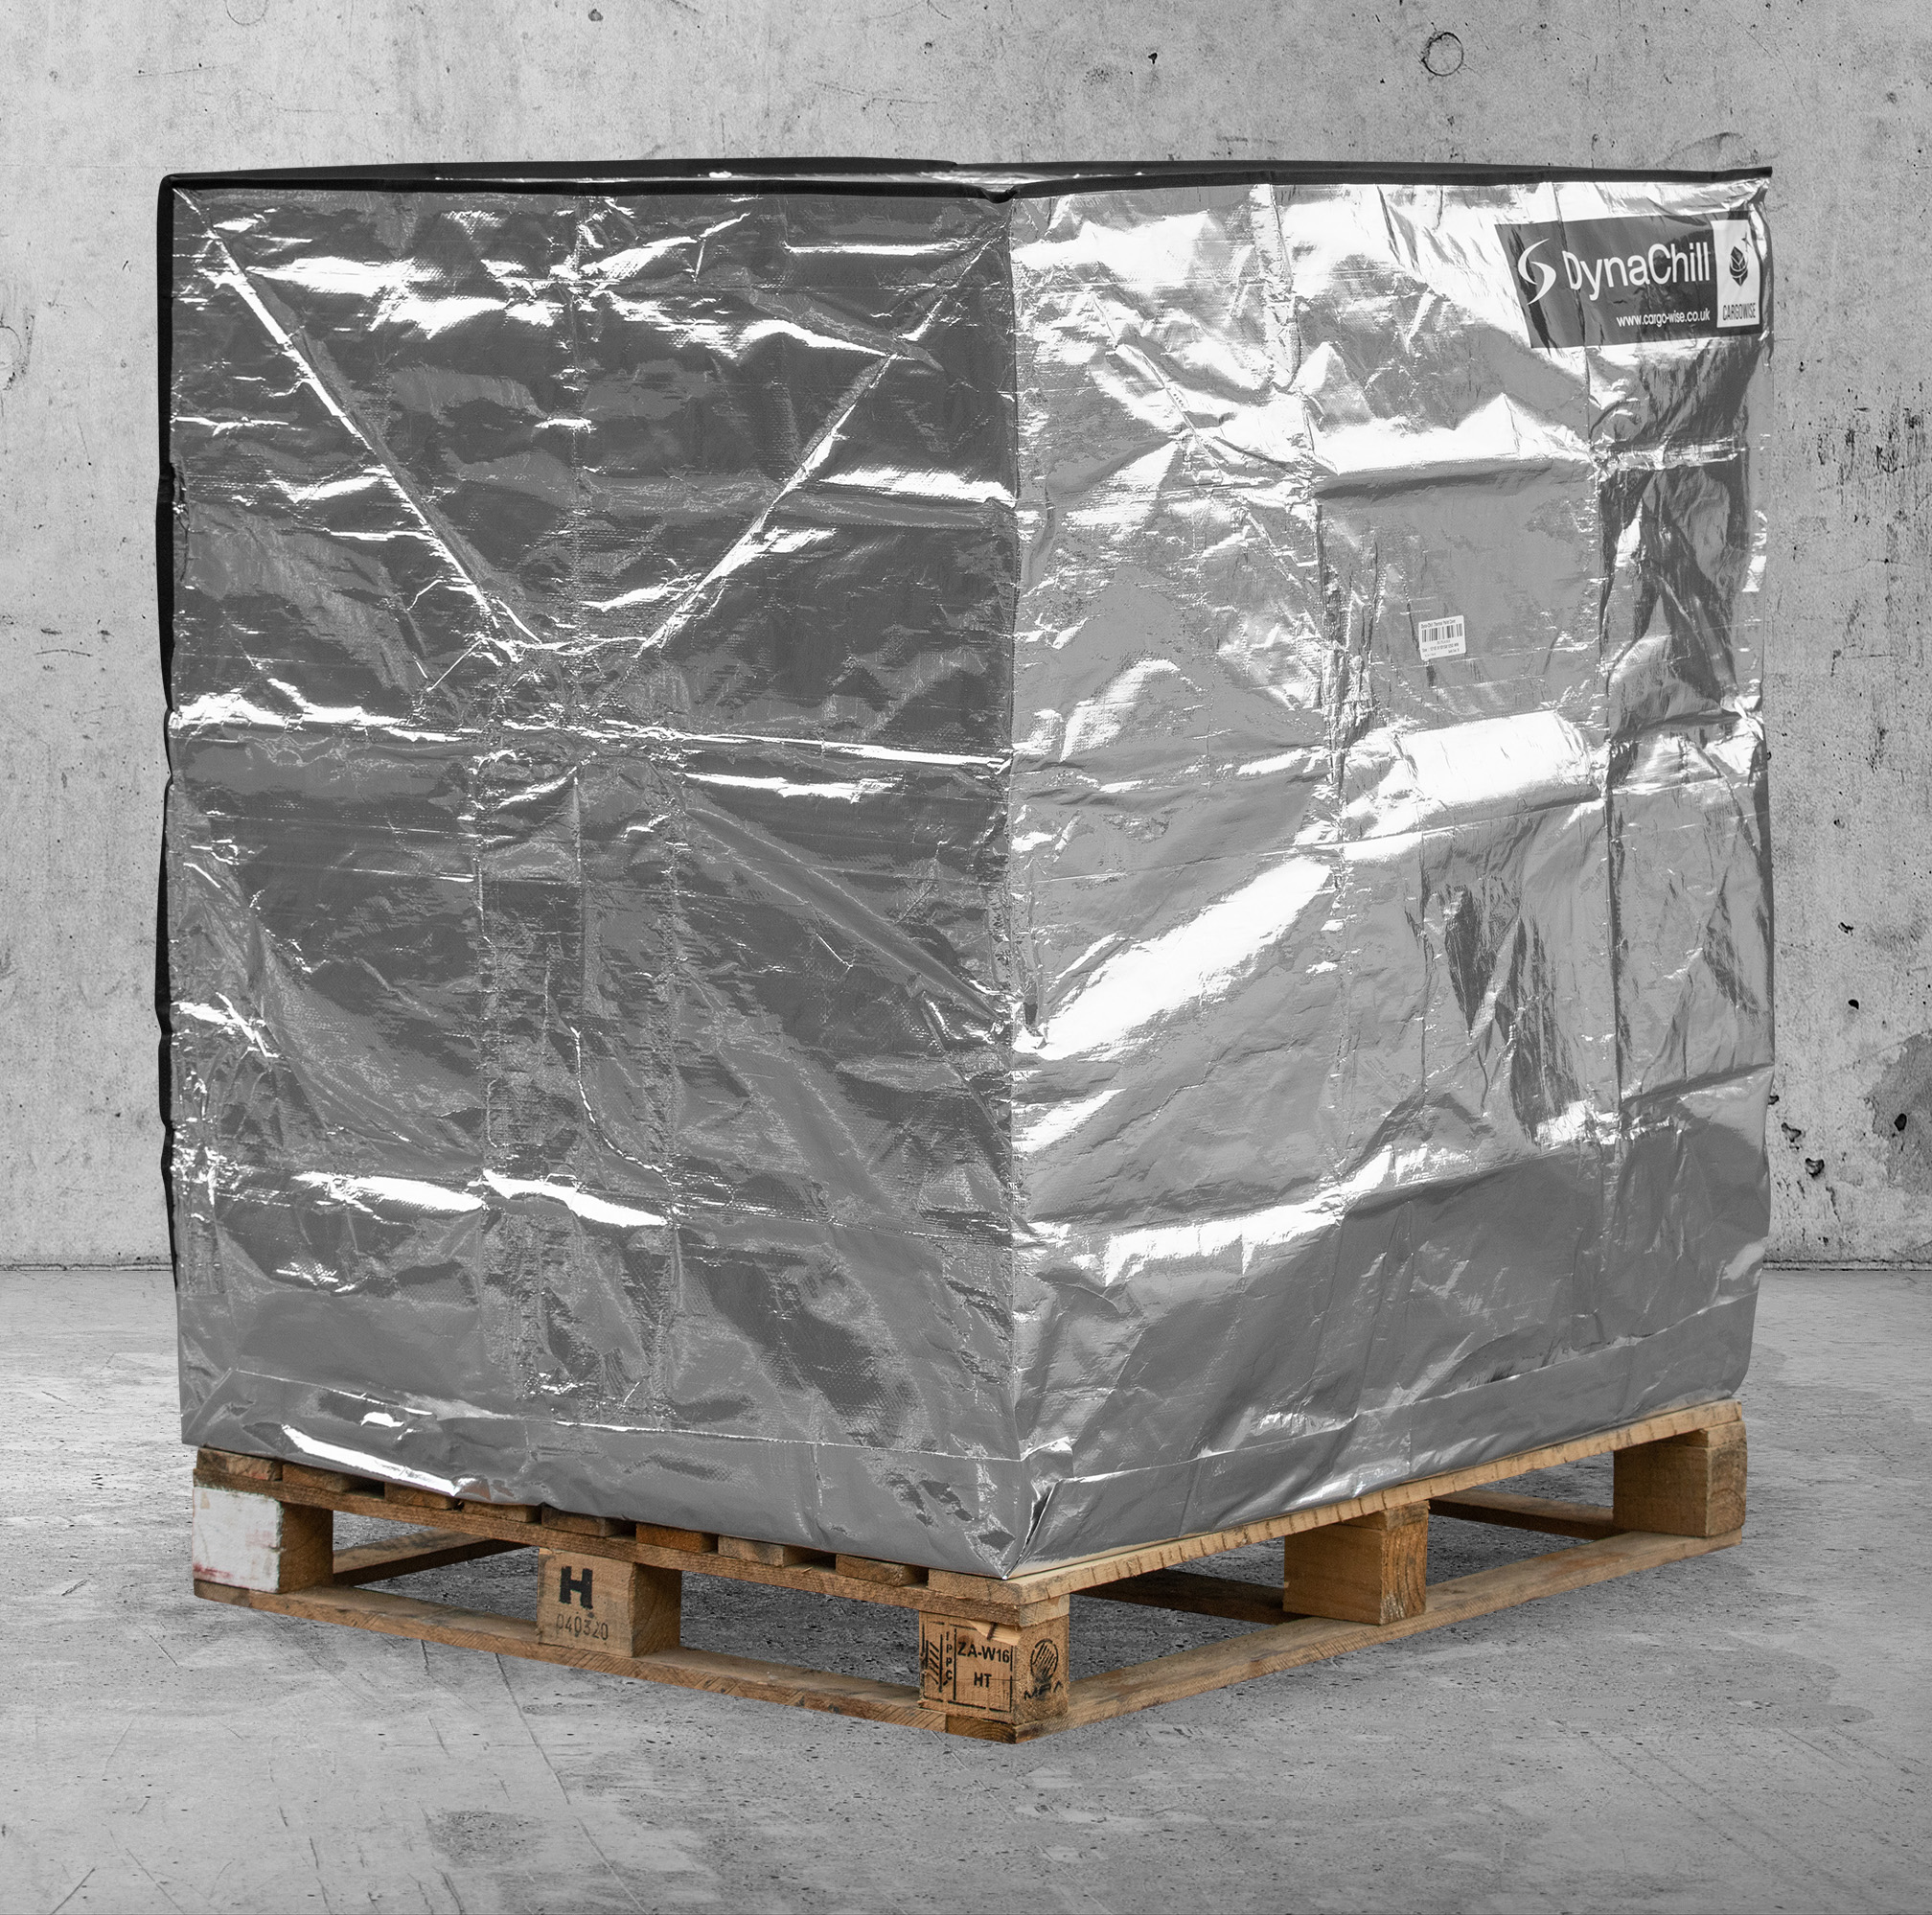 How can a foil pallet cover protect goods from temperature spikes?